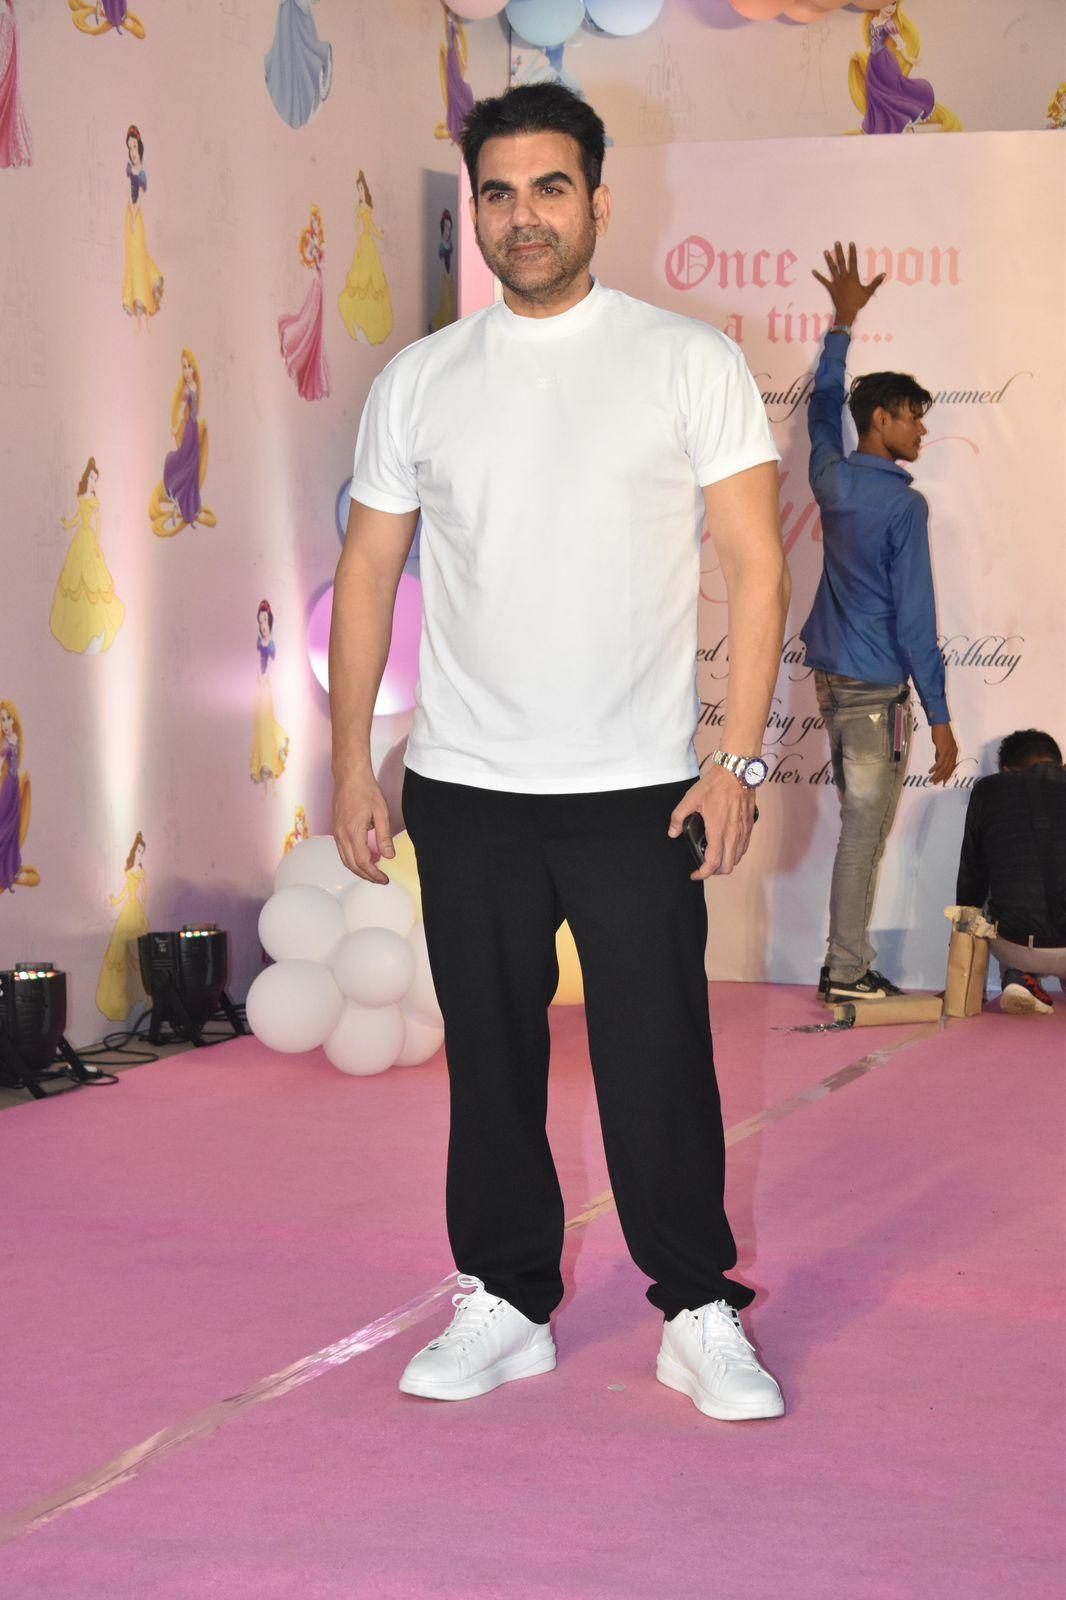 Arbaaz Khan arrived in a white shirt which he paired with black trousers